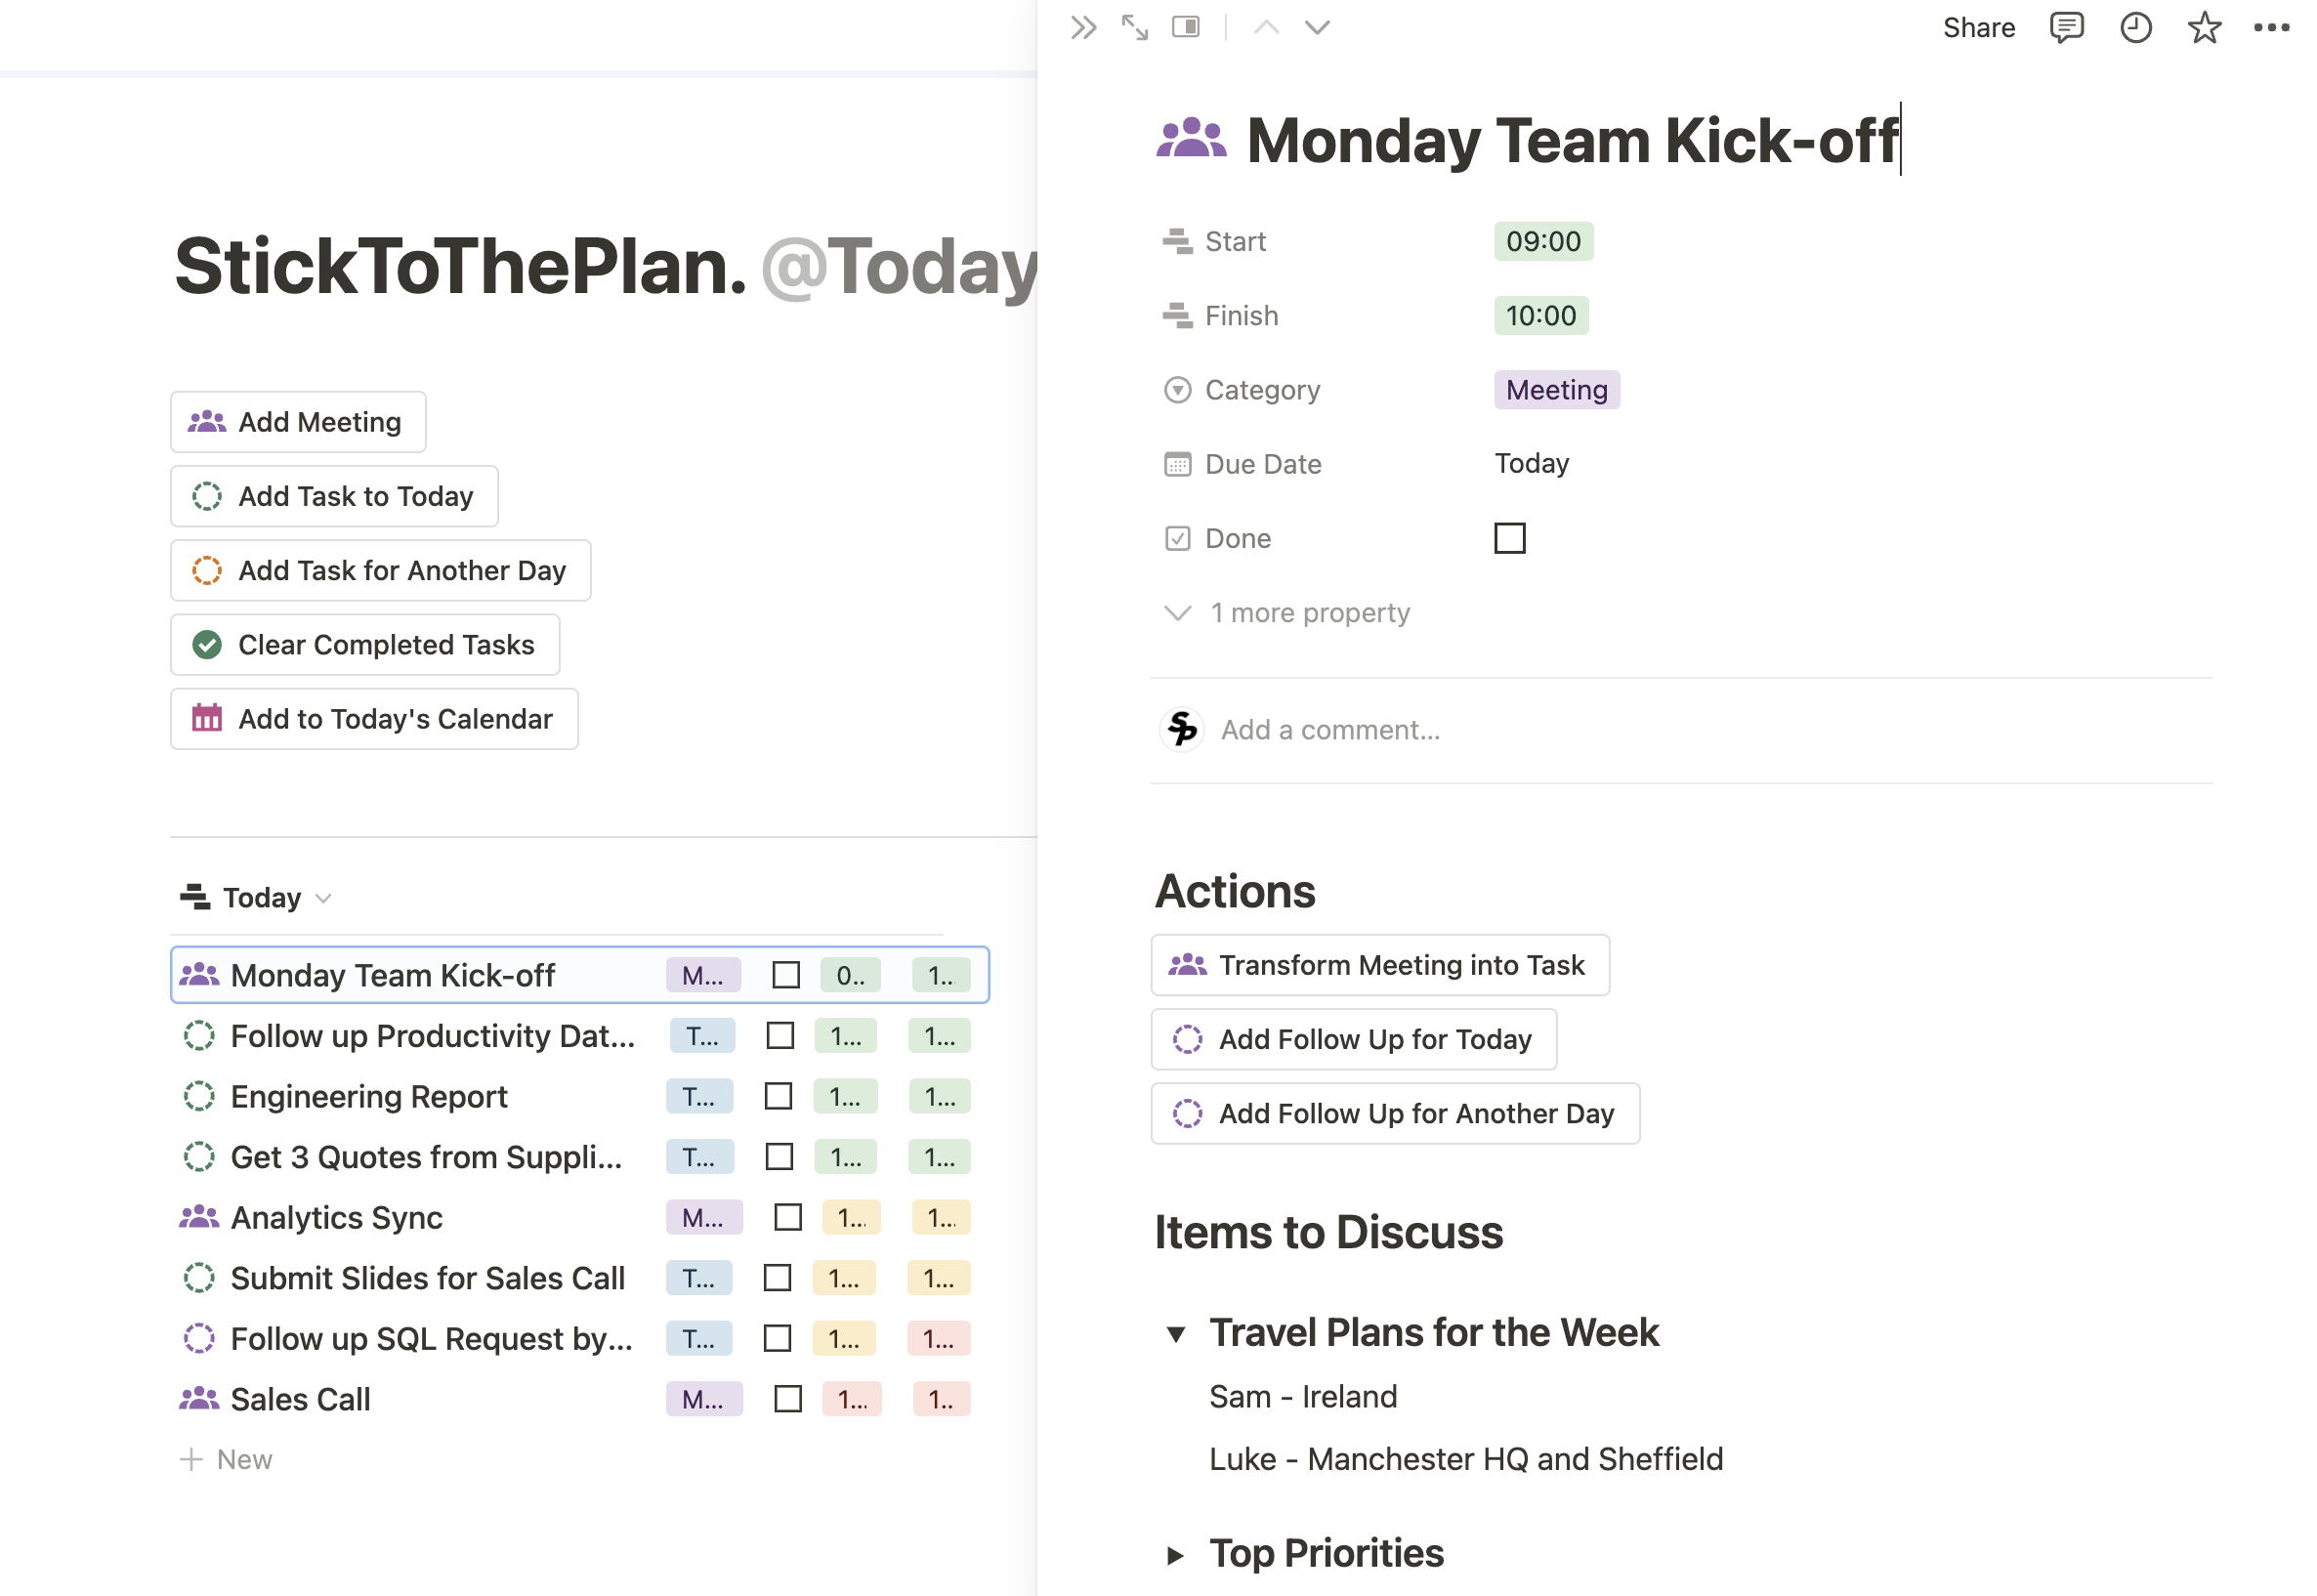 Automated Daily Planner. - From StickToThePlan.

Designed to help you deliver day after day after day